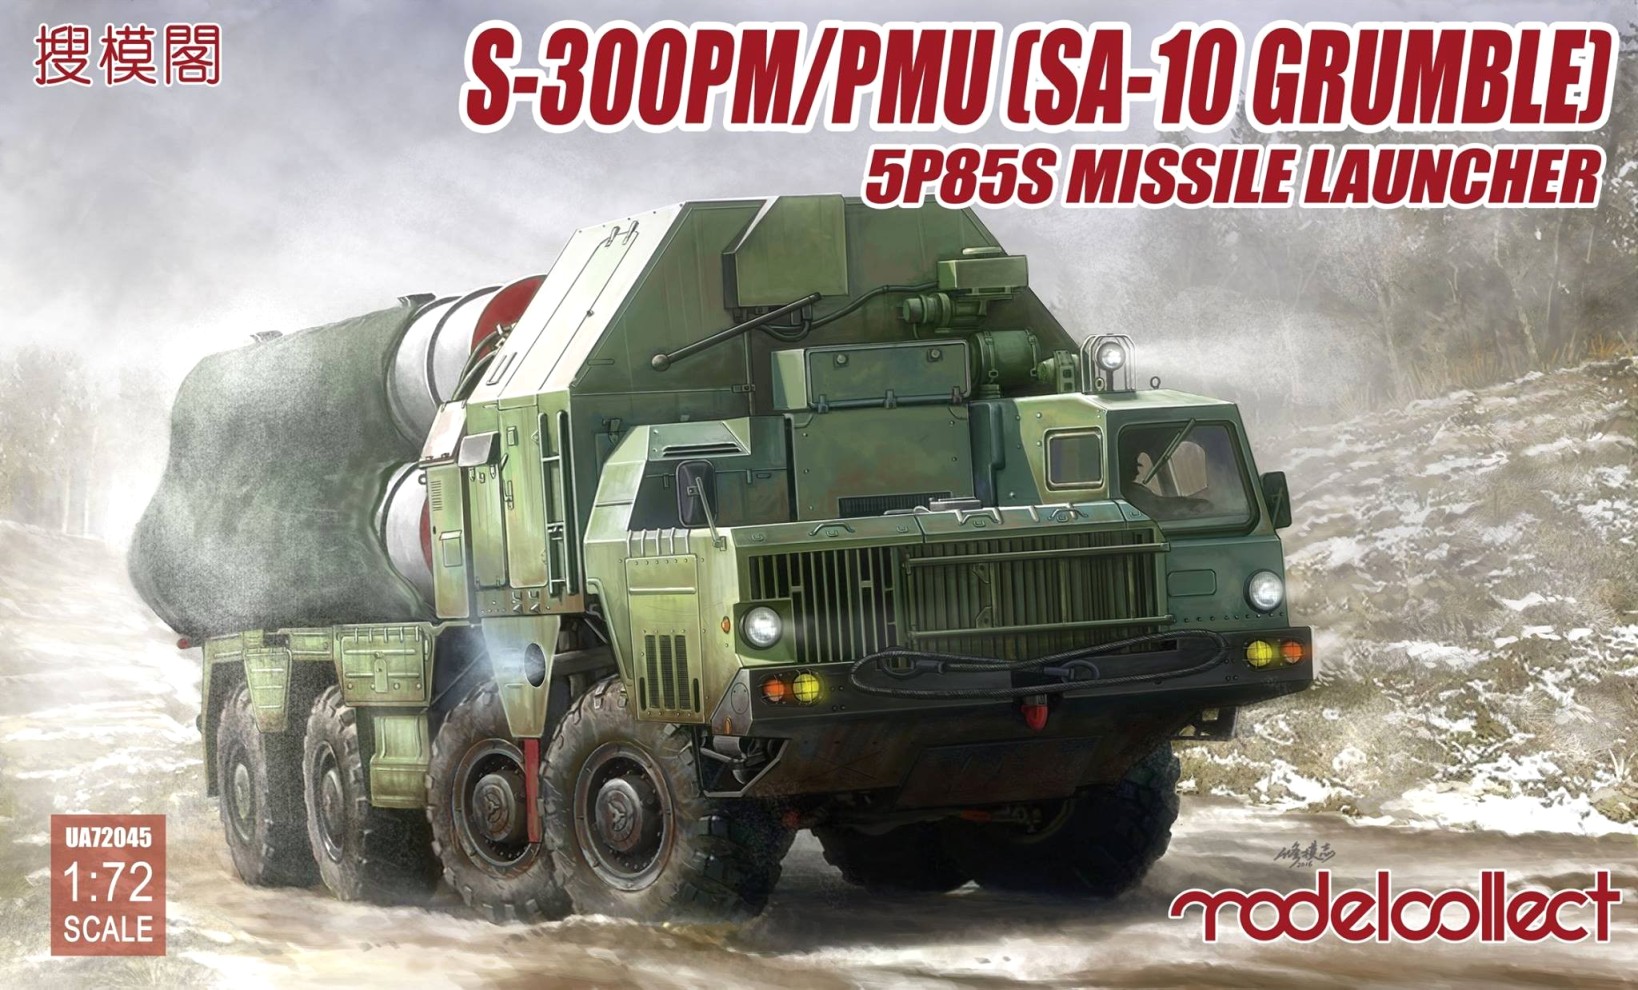 S-300 (SA-10 Grumble) Missile launcher, 5P85S/SD